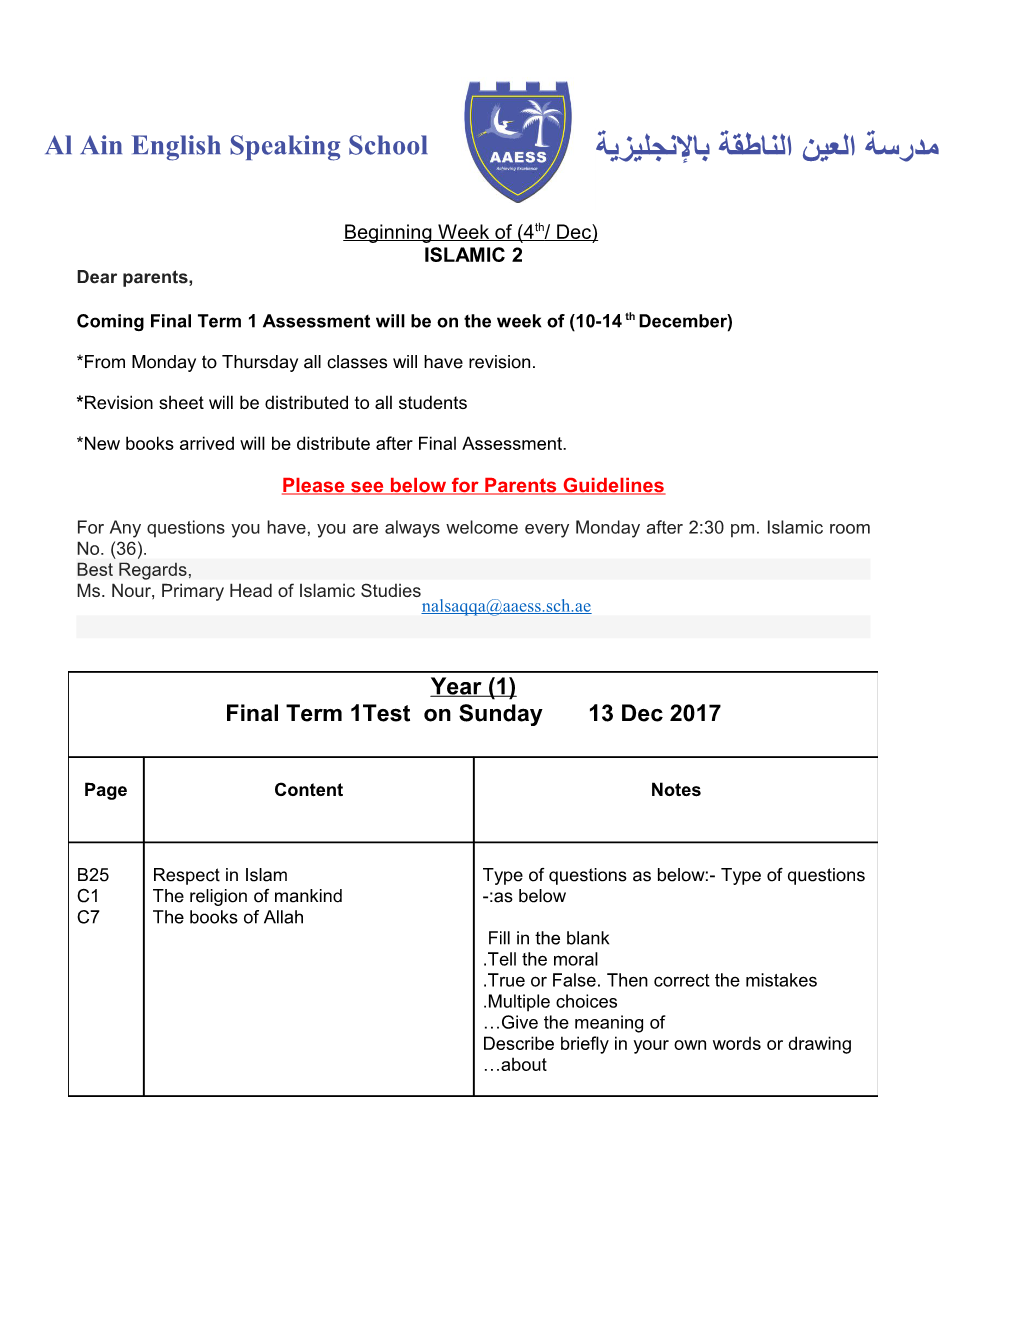 Coming Final Term 1 Assessment Will Be on the Week of (10-14Th December)